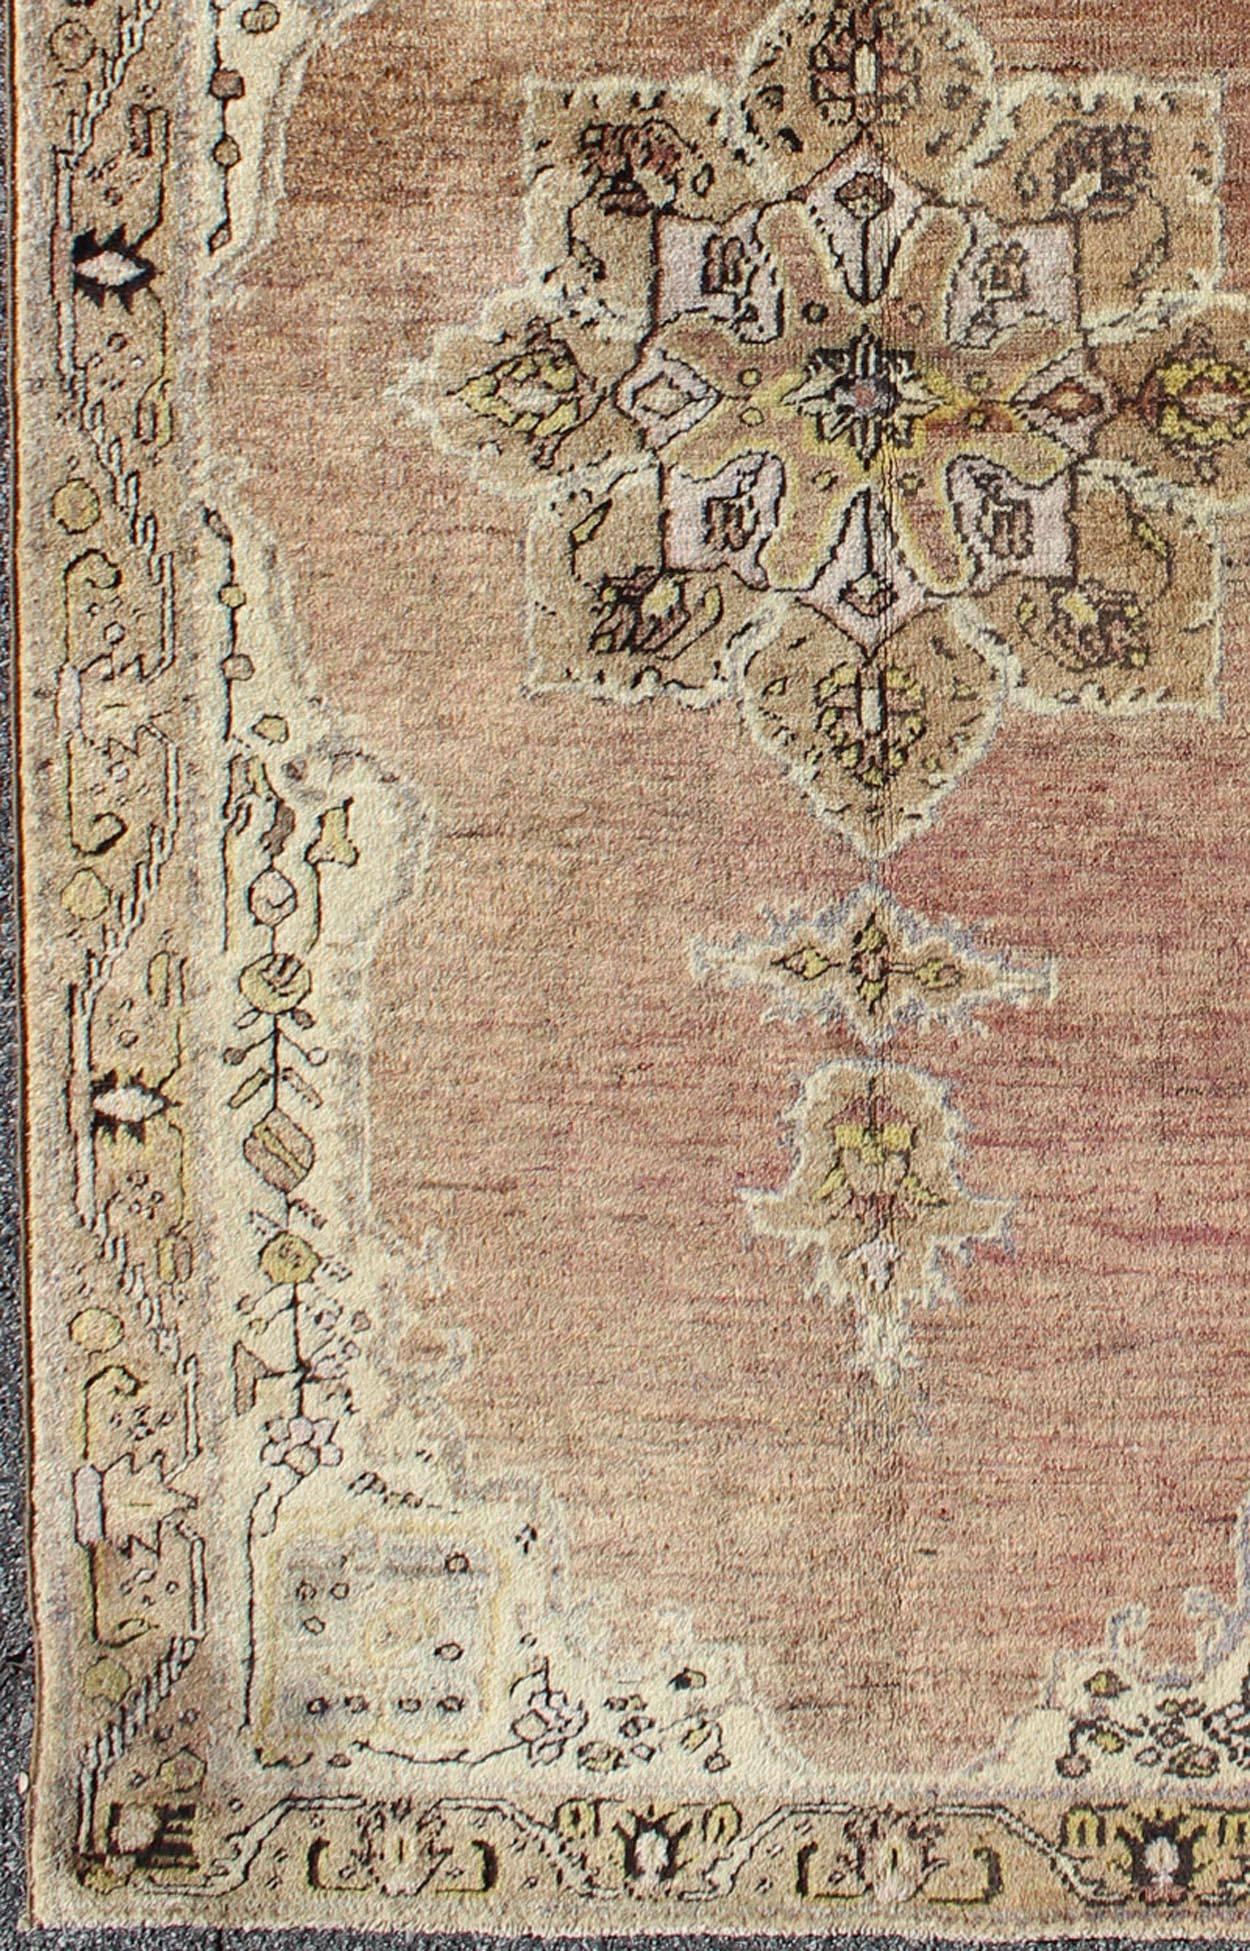 This vintage Turkish Oushak rug features an intricately beautiful design with a stylized floral aesthetic. The central medallion is surrounded by four cornices in the central field. The various shades of cream, yellow, charcoal, and gray blend